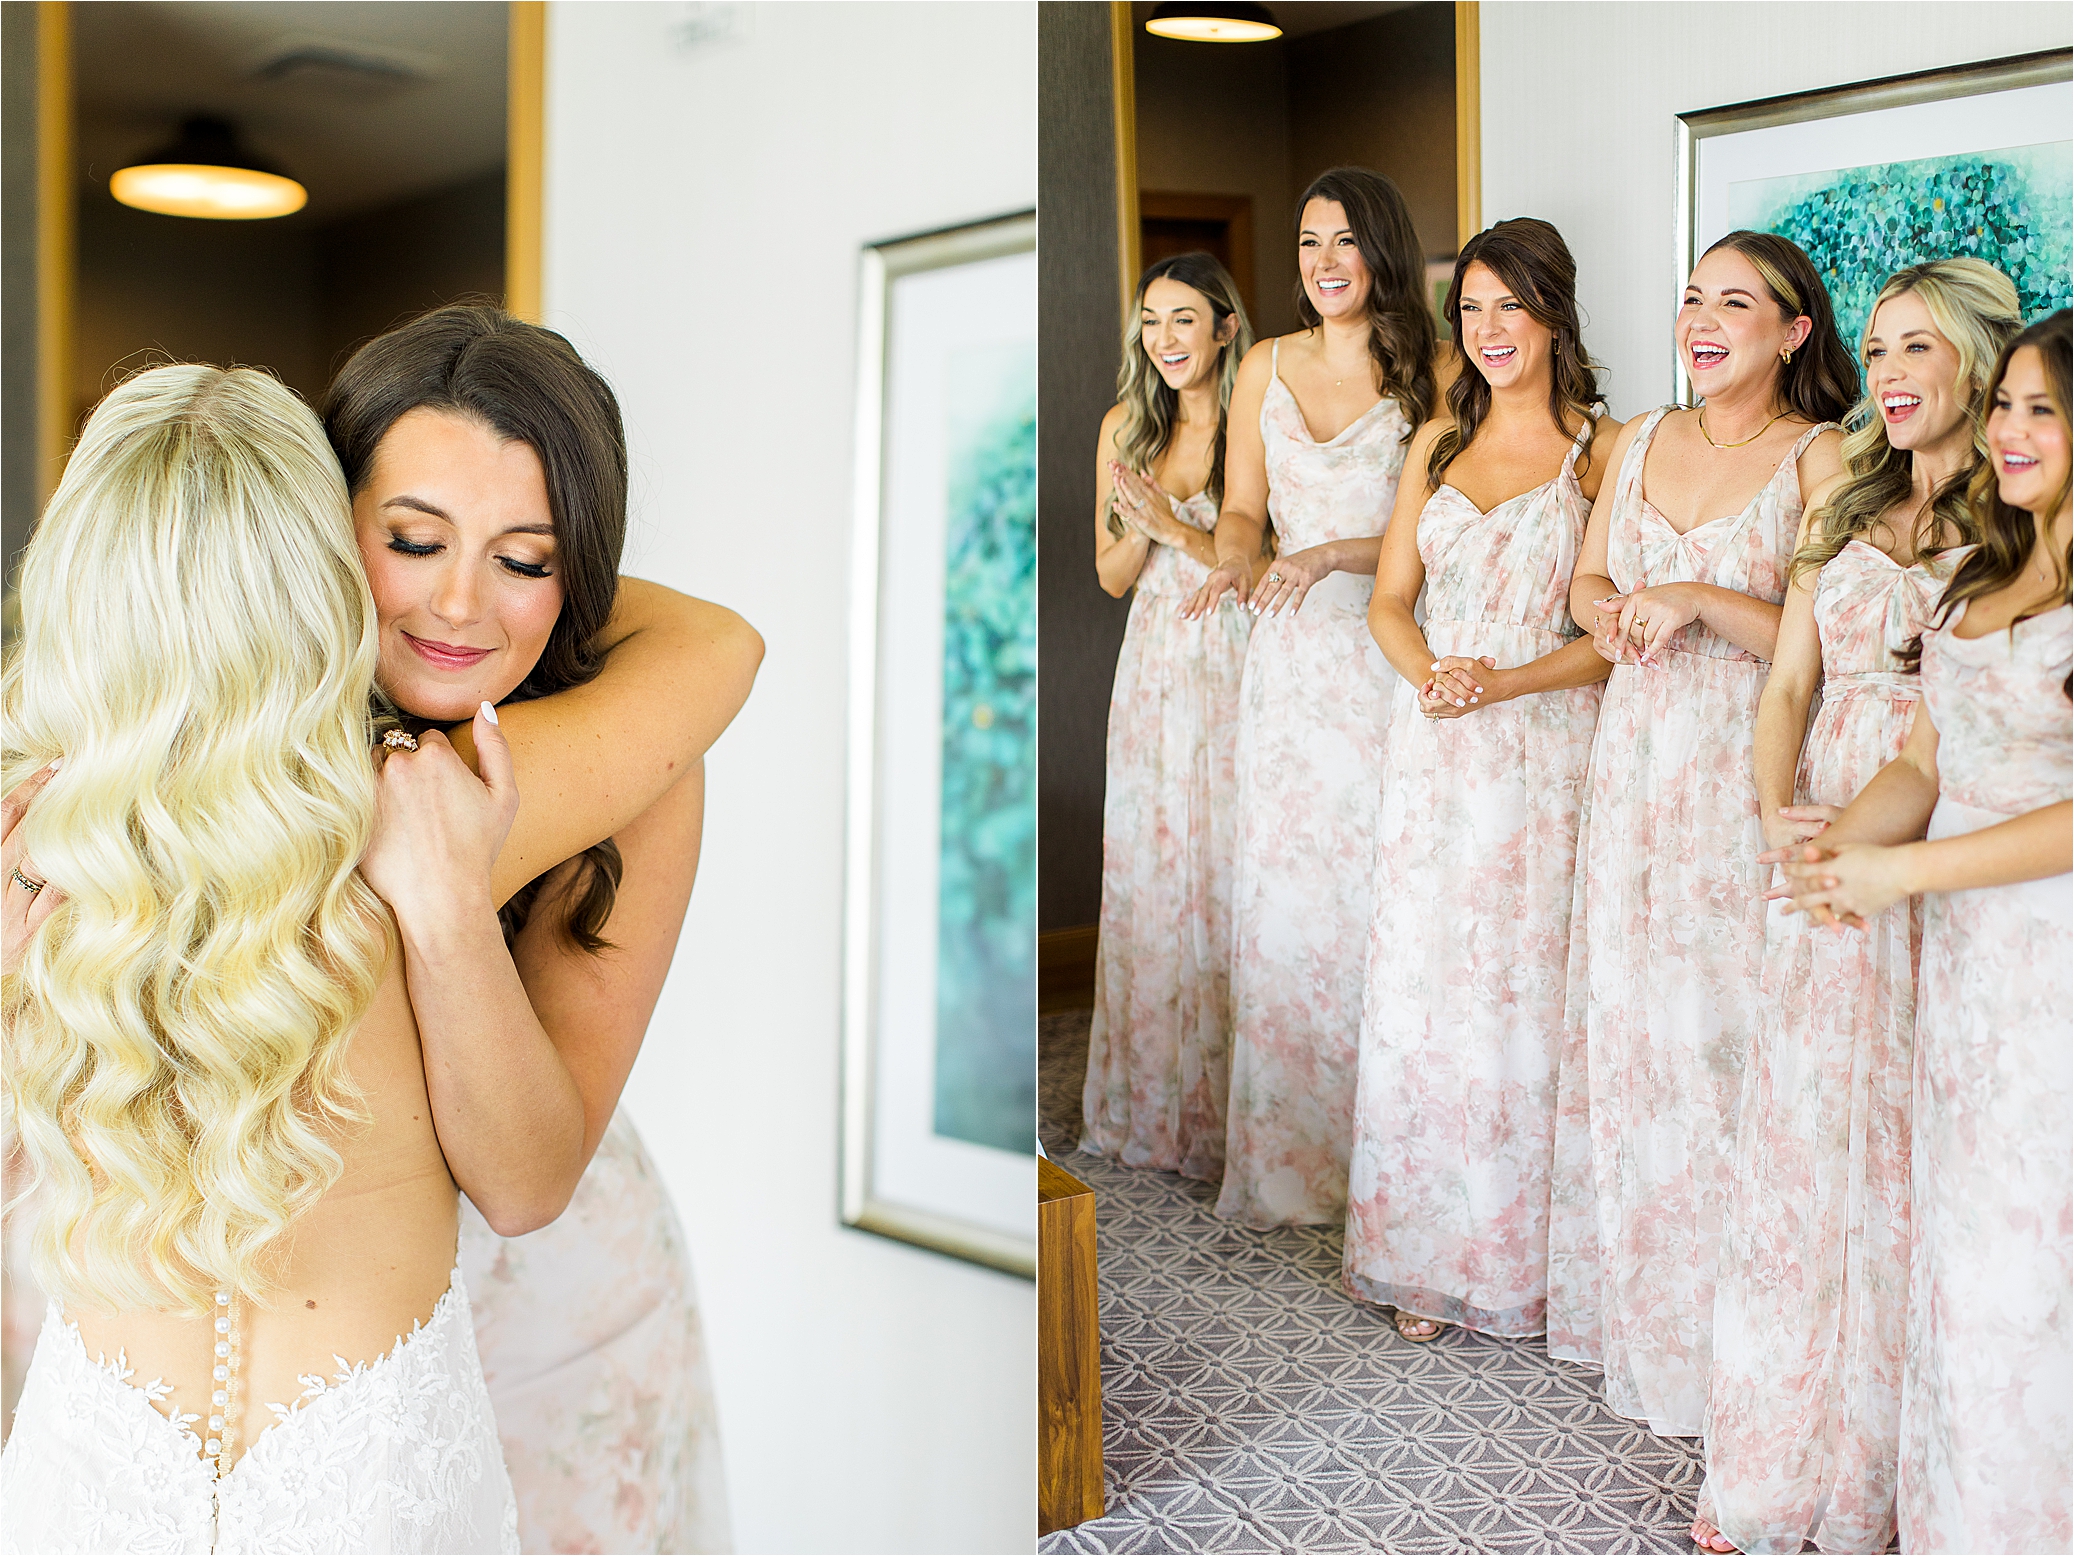 Bridesmaids in floral dresses smile and cheer for the bride in her wedding dress in a hotel room at JW Marriott in Austin, Texas 